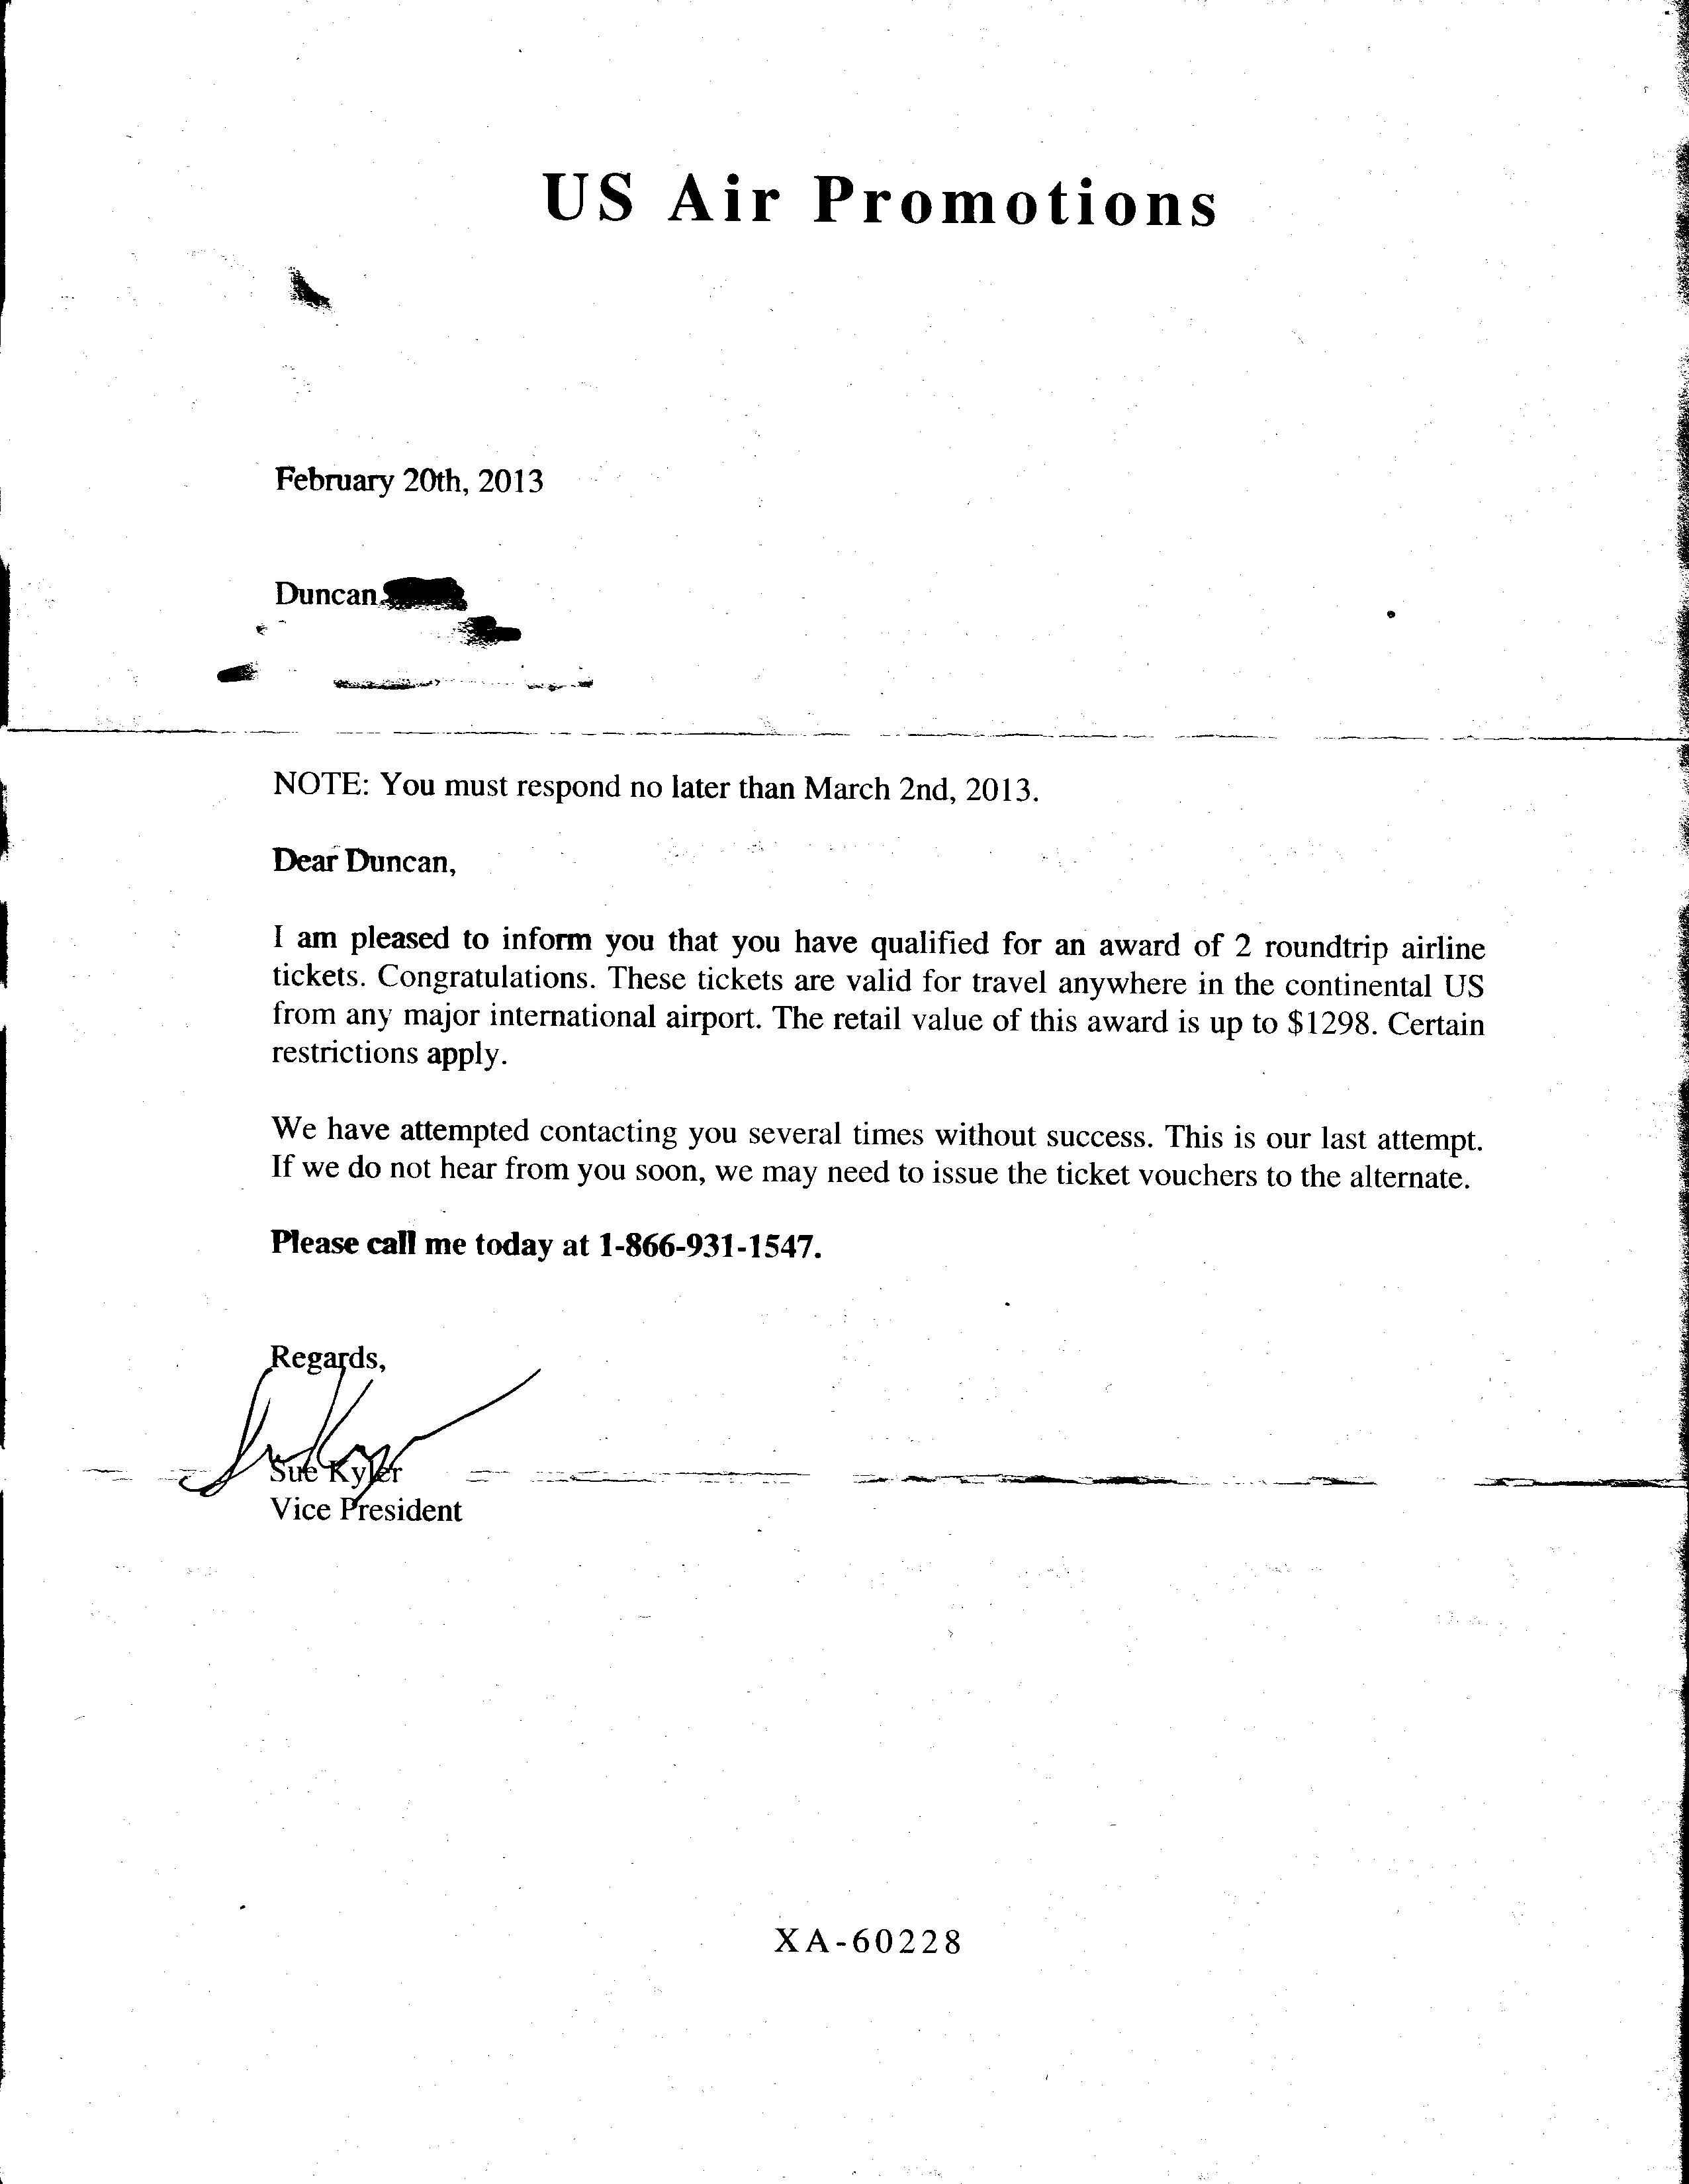 US Air Promotions Letter